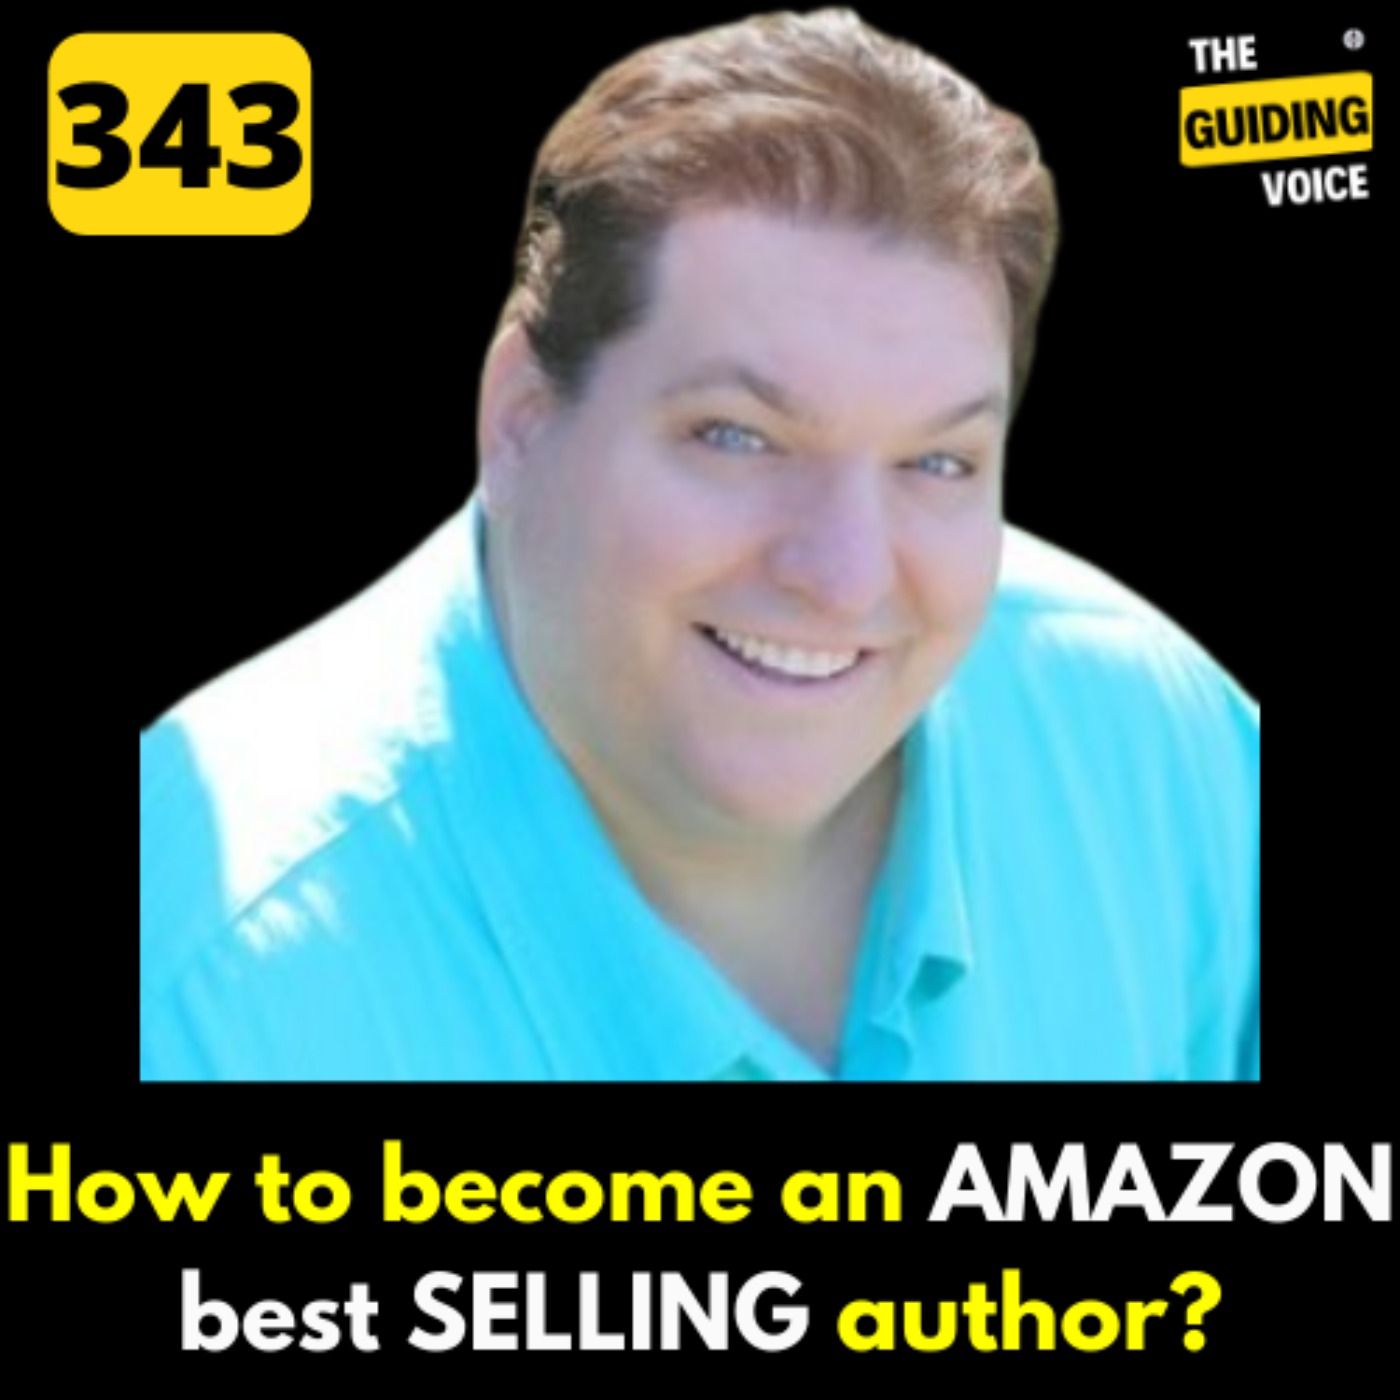 How to become a best selling author on Amazon? | Steve Kidd | #TGV343